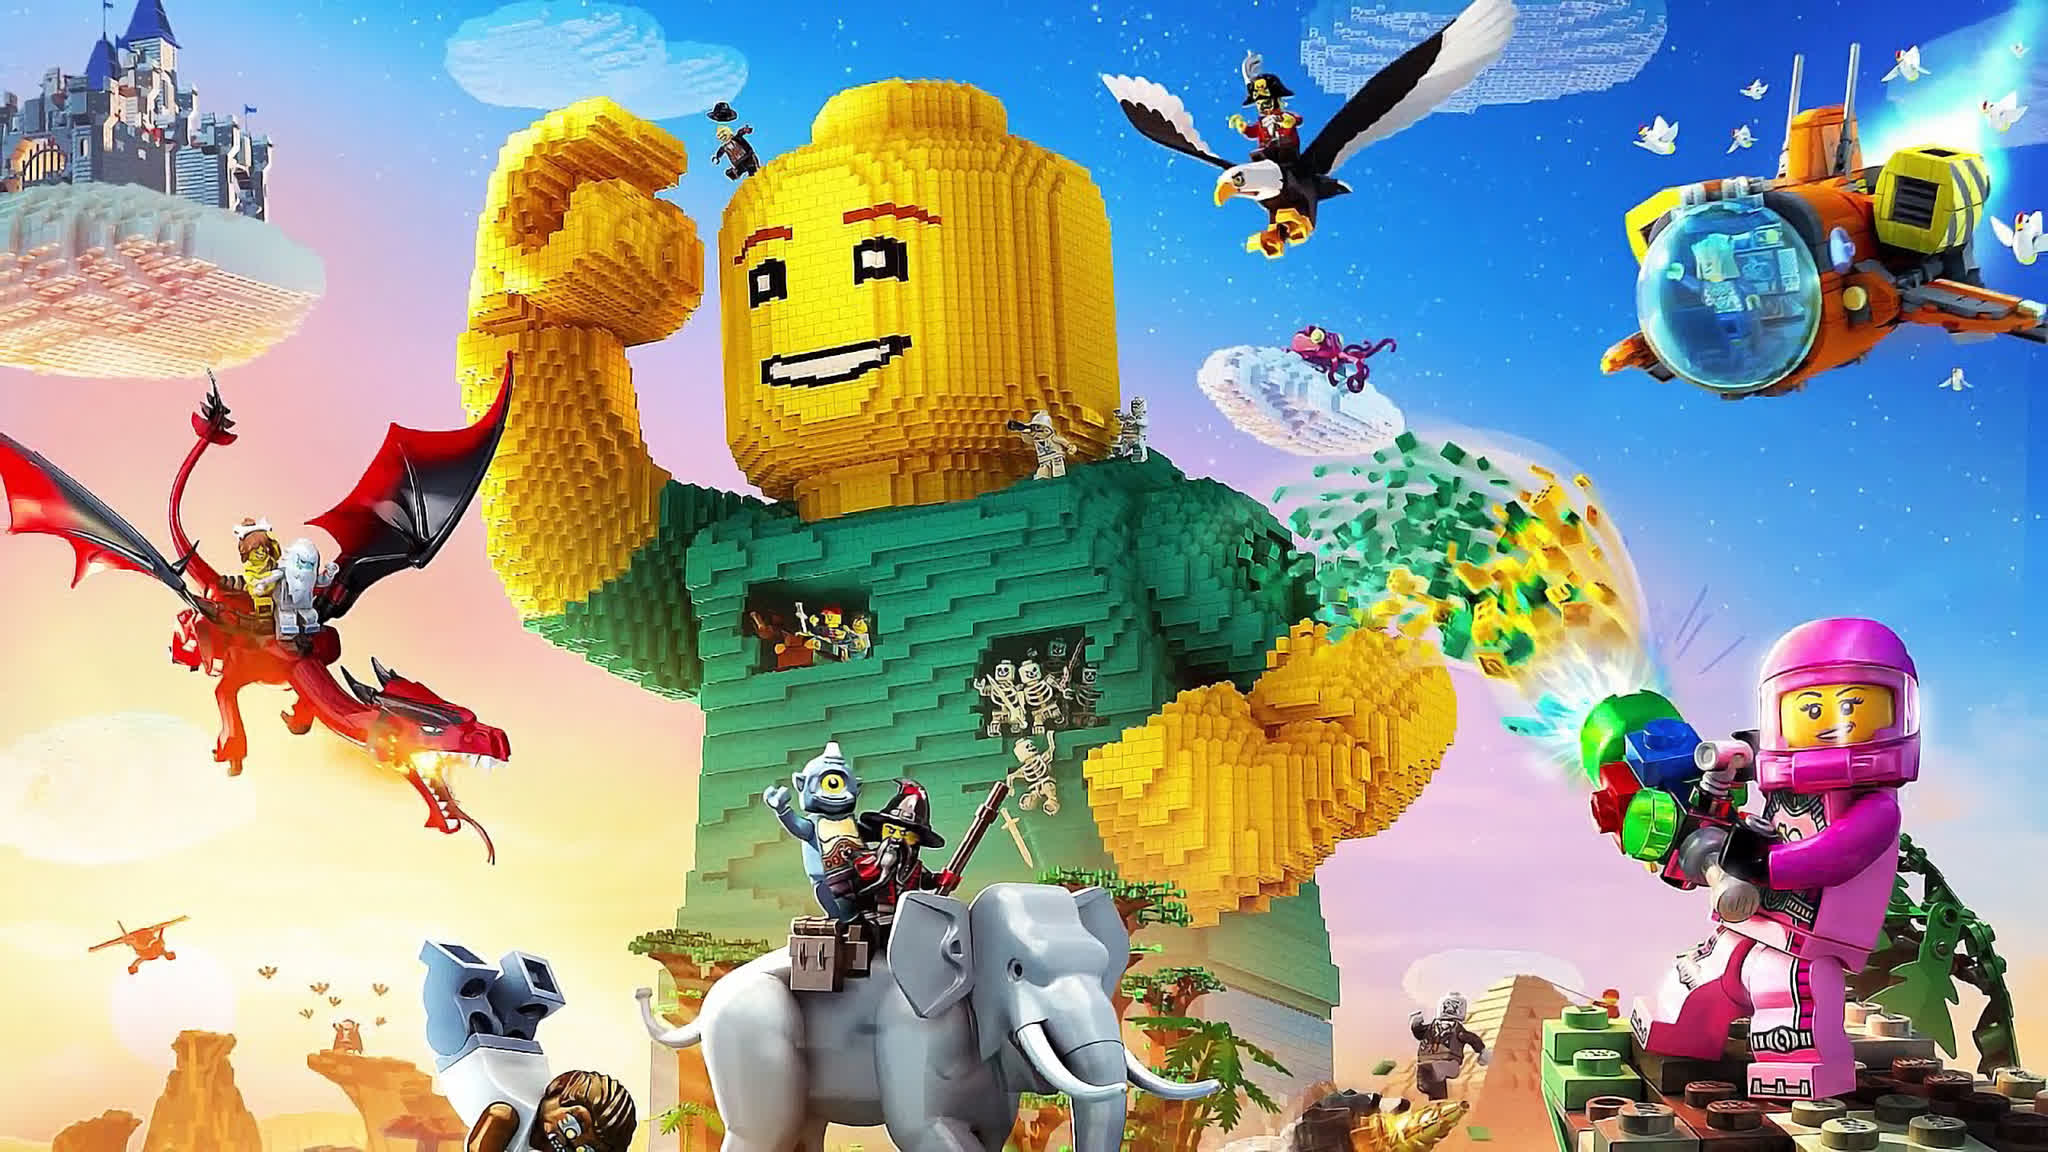 Lego and Epic Games want to make the metaverse safer for kids